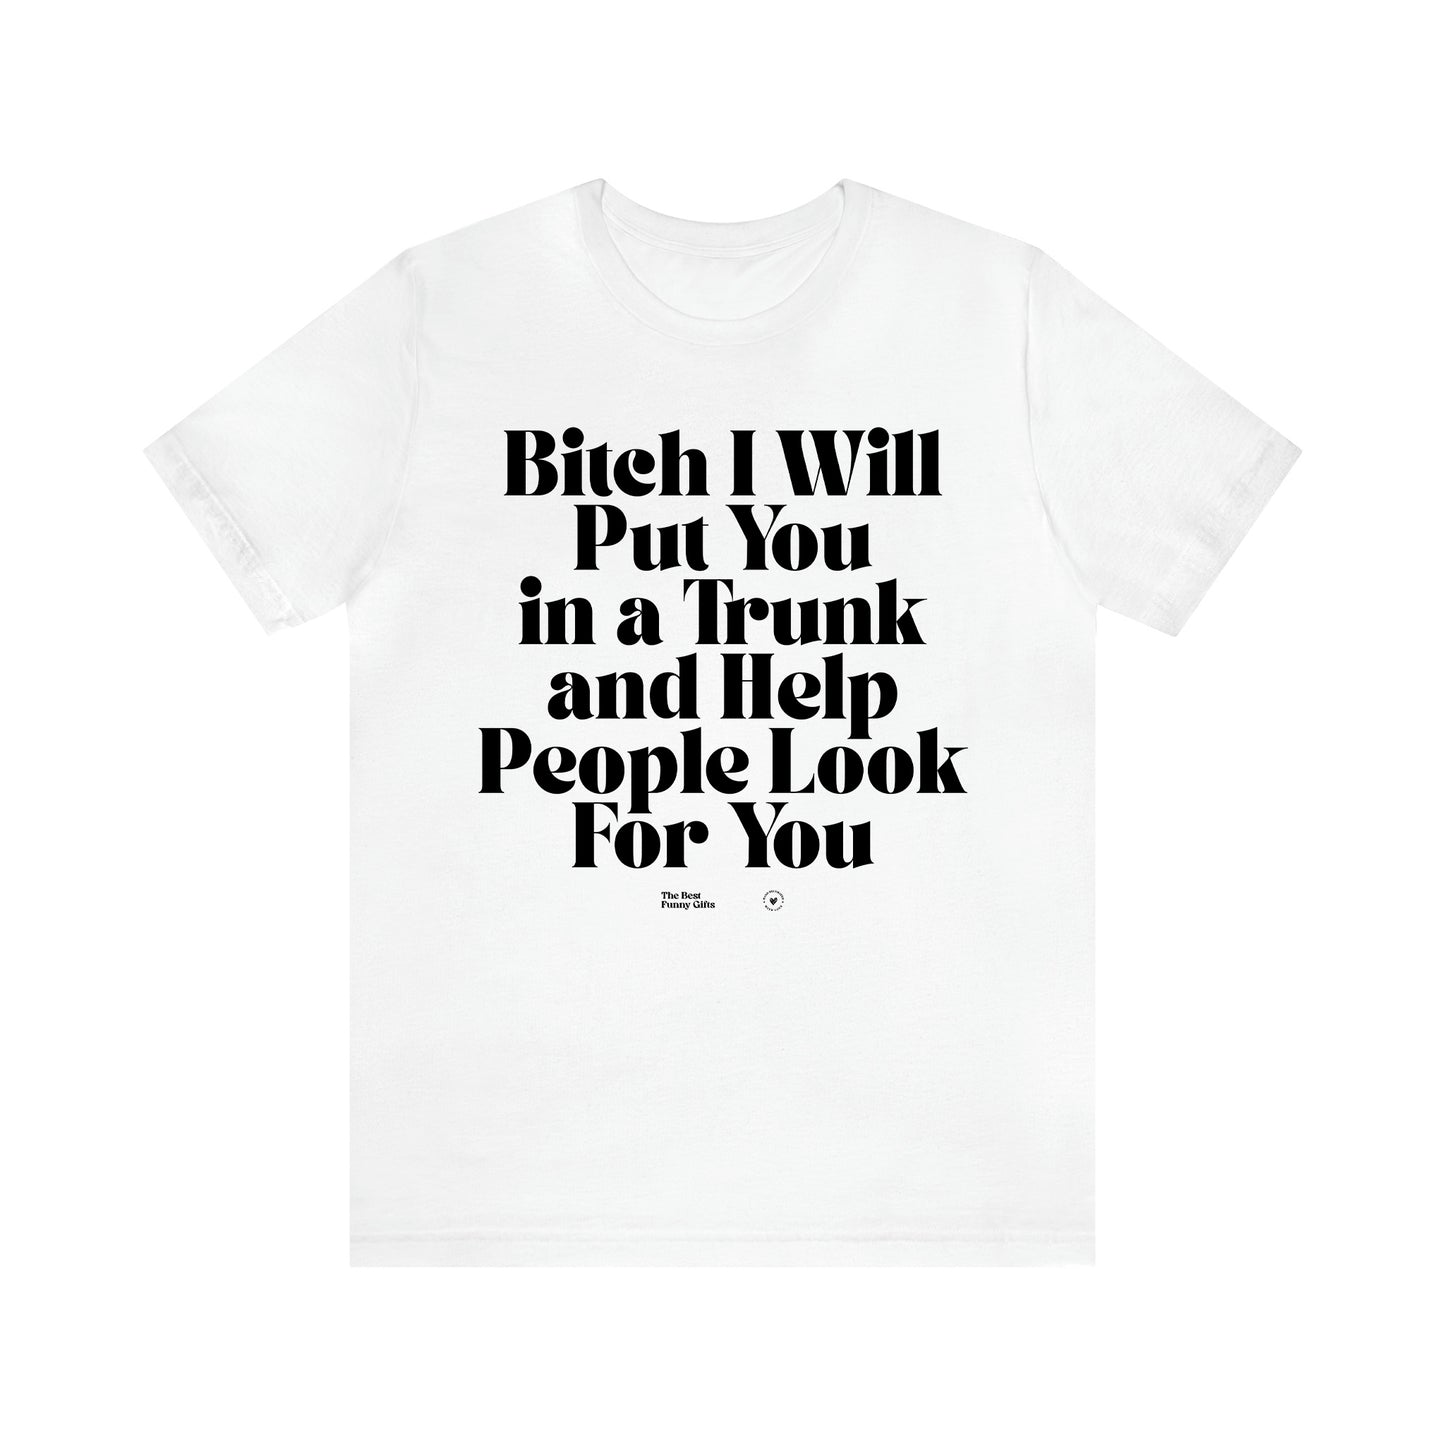 Women's T Shirts Bitch I Will Put You in a Trunk and Help People Look for You - The Best Funny Gifts